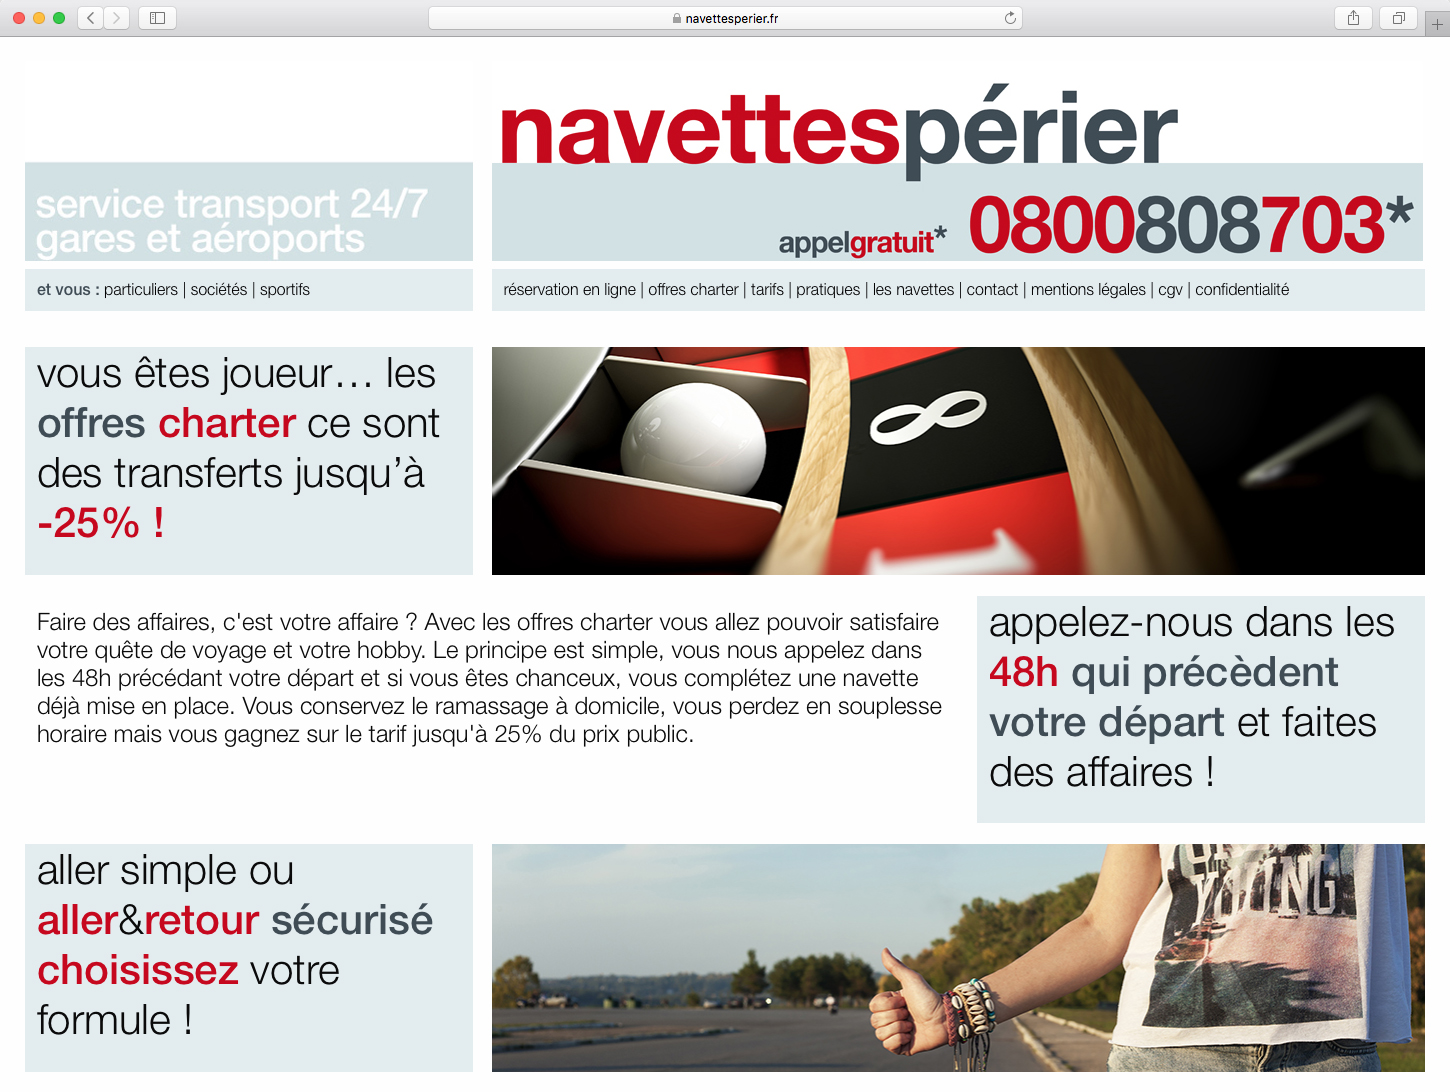 navettes-perier-offres-charter